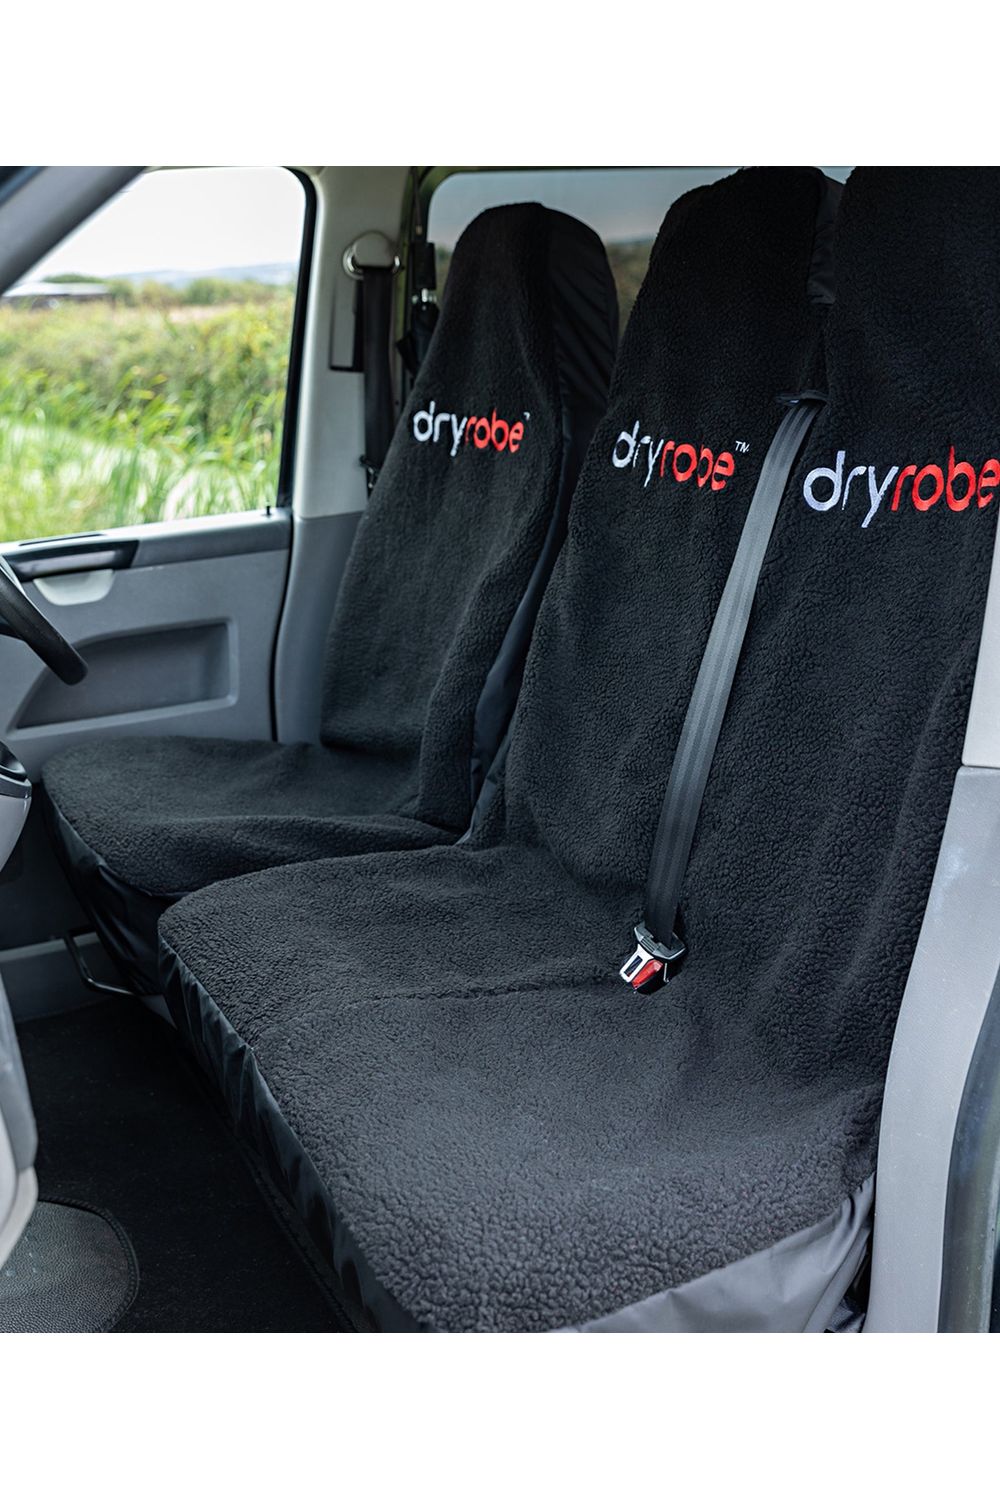 Dryrobe Carseat Cover Black